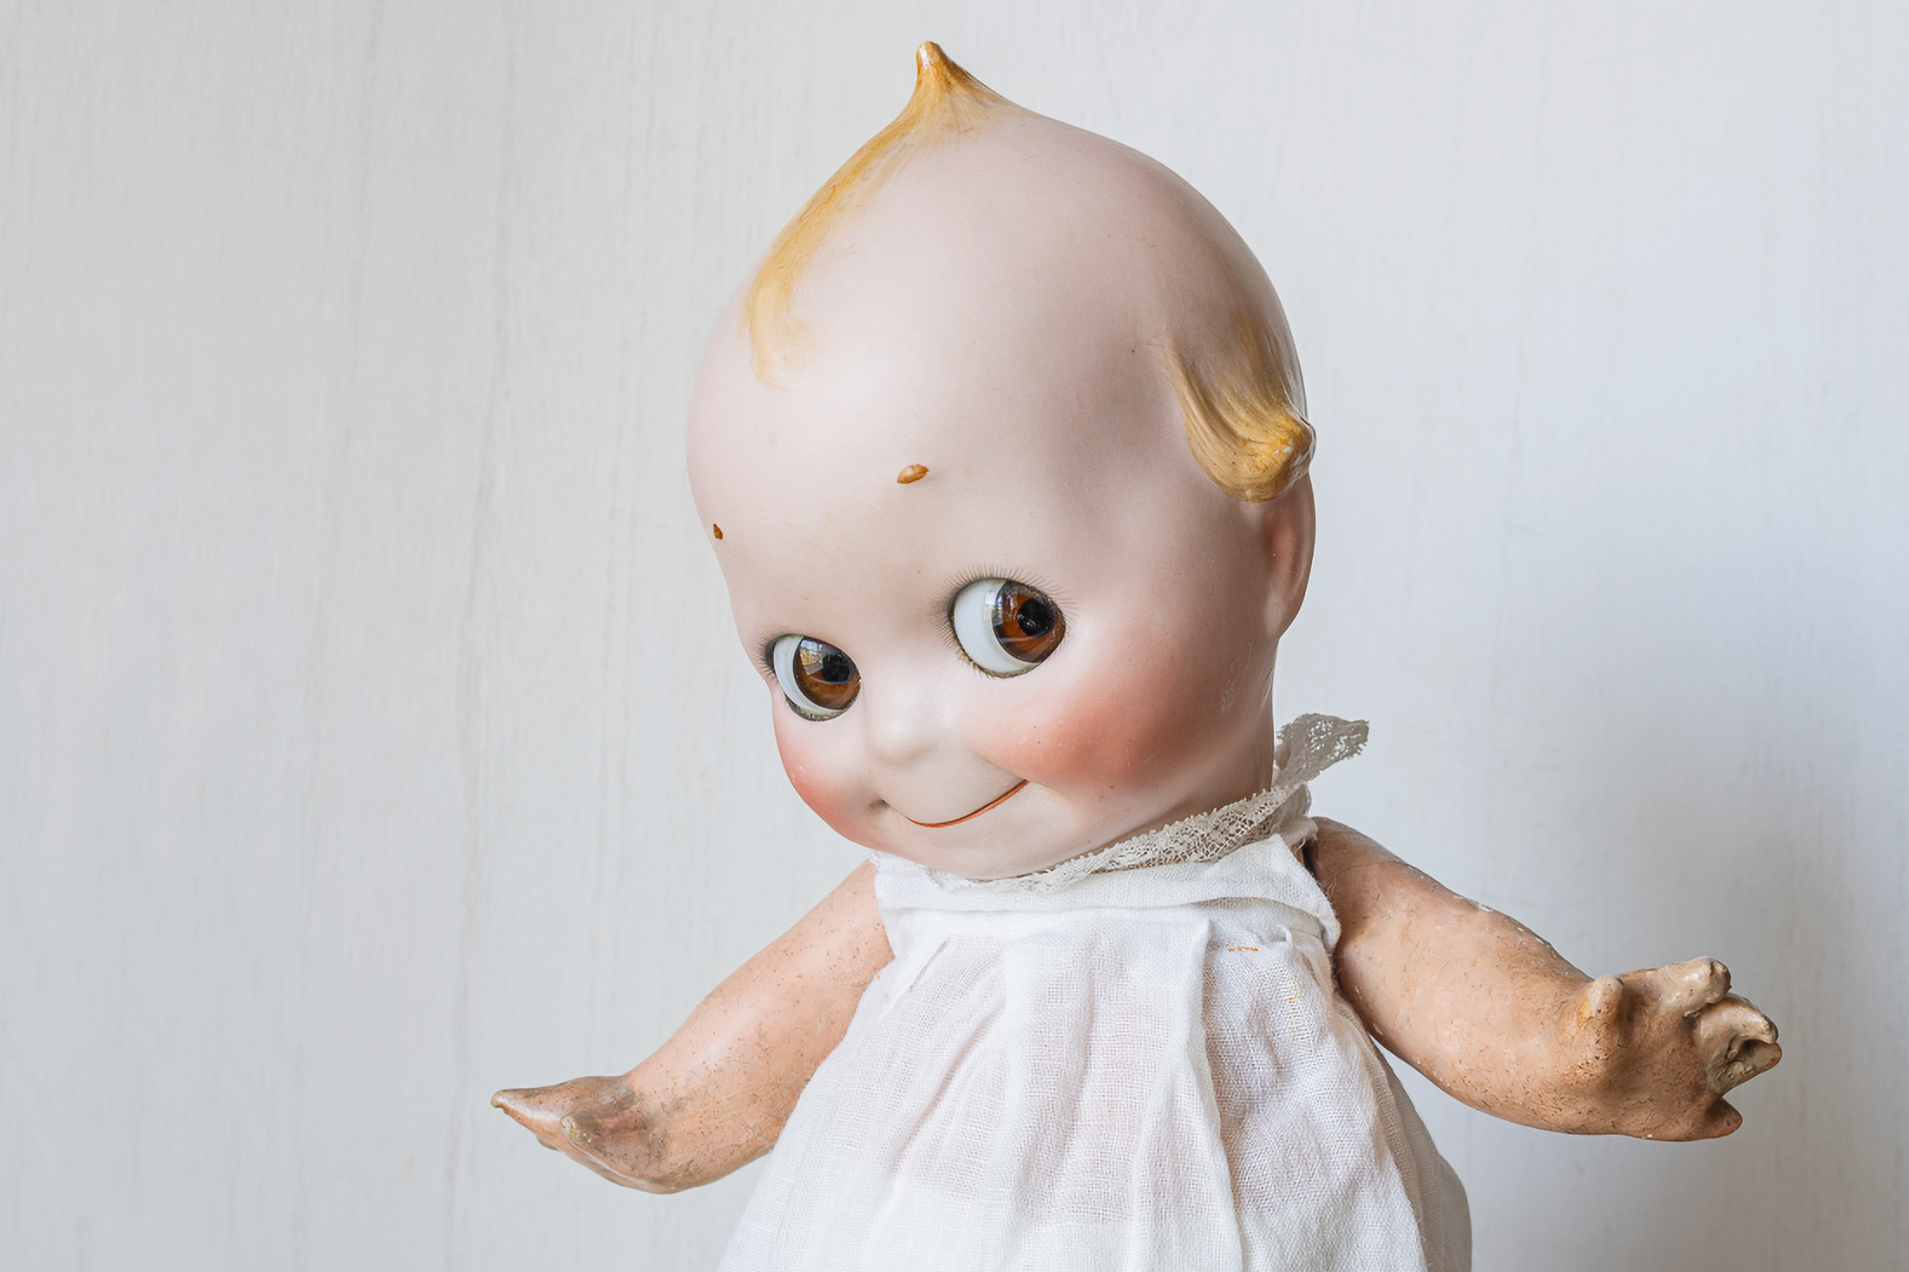 Kewpie doll with composition jointed body and bisque head made by J.D. Kestner